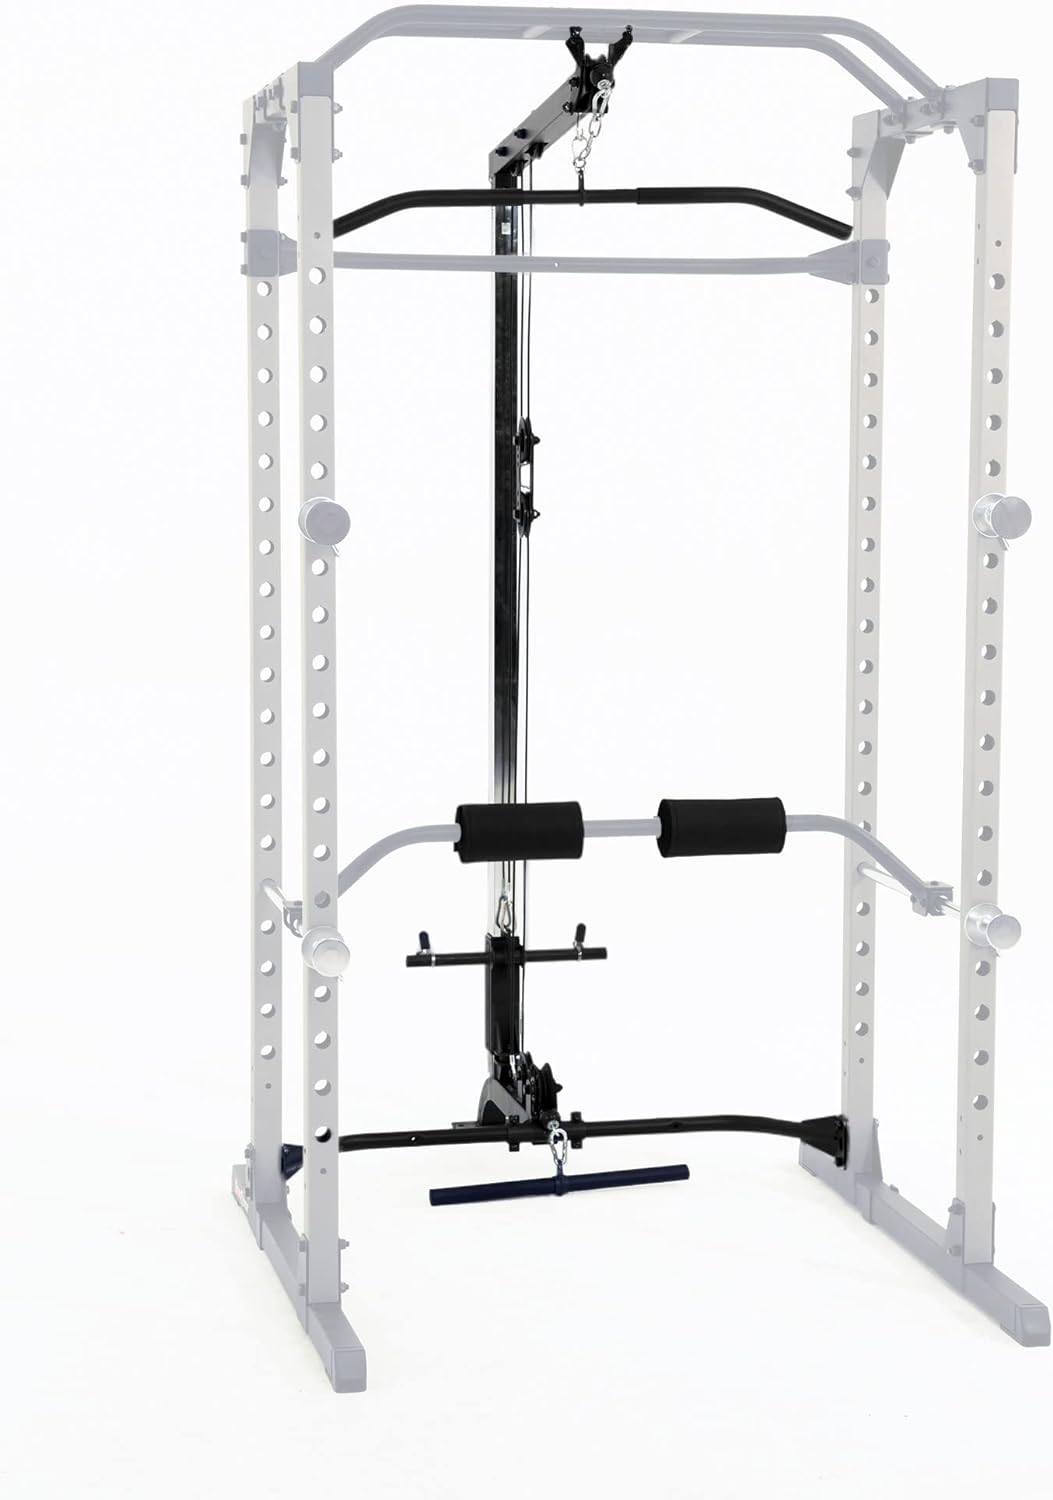 Fitness Reality Squat Rack Power Cage with | Optional LAT Pulldown & Leg Holdown Attachment S149 $149